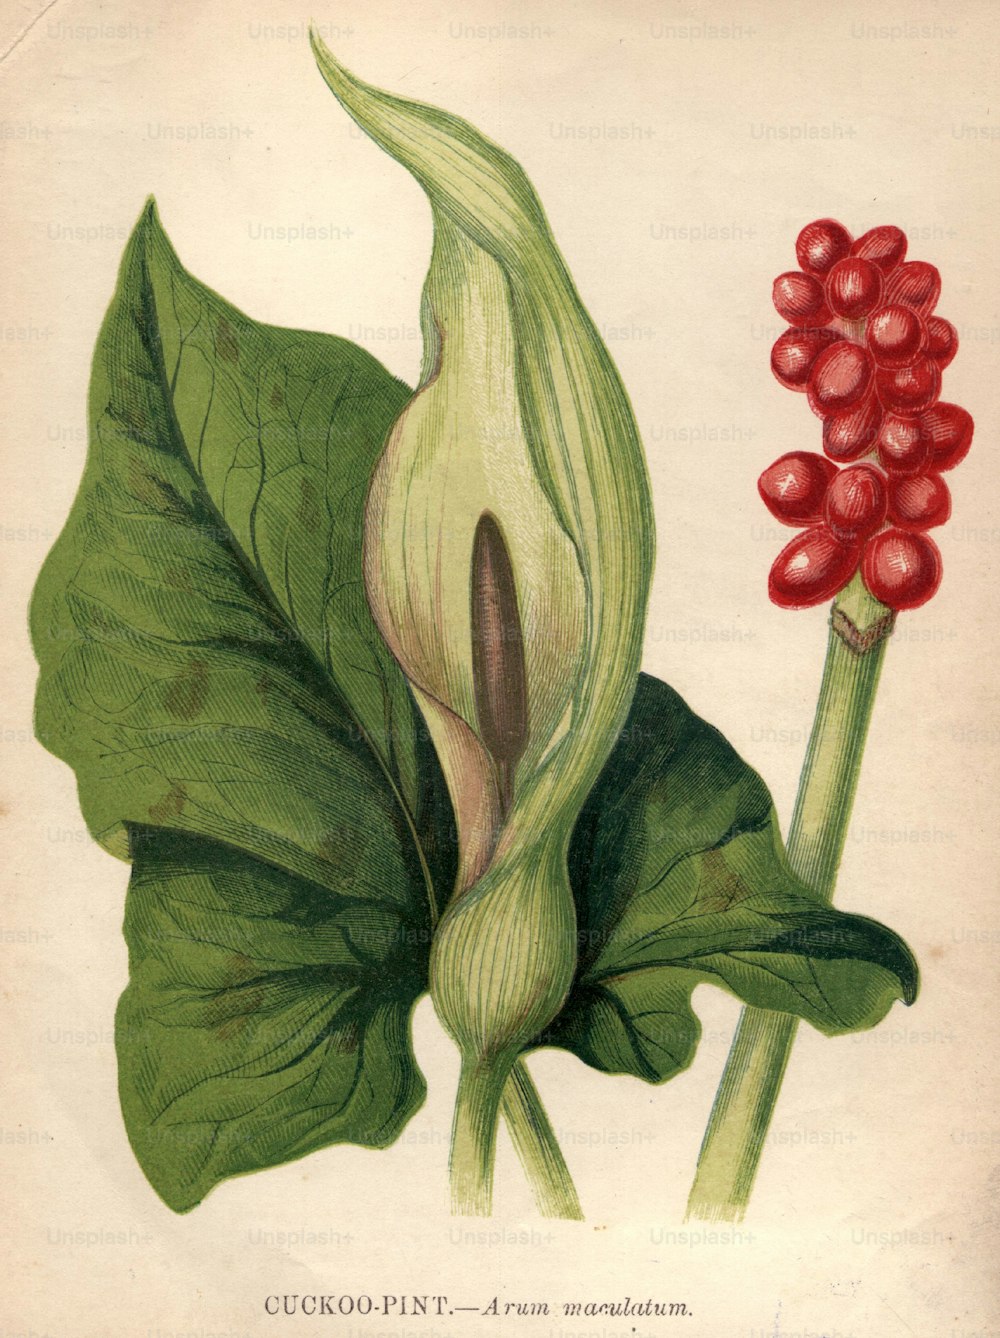 circa 1900:  Arum maculatum, or cuckoo pint, also known as wake robin and lords-and-ladies, with its highly poisonous red berries.  (Photo by Hulton Archive/Getty Images)